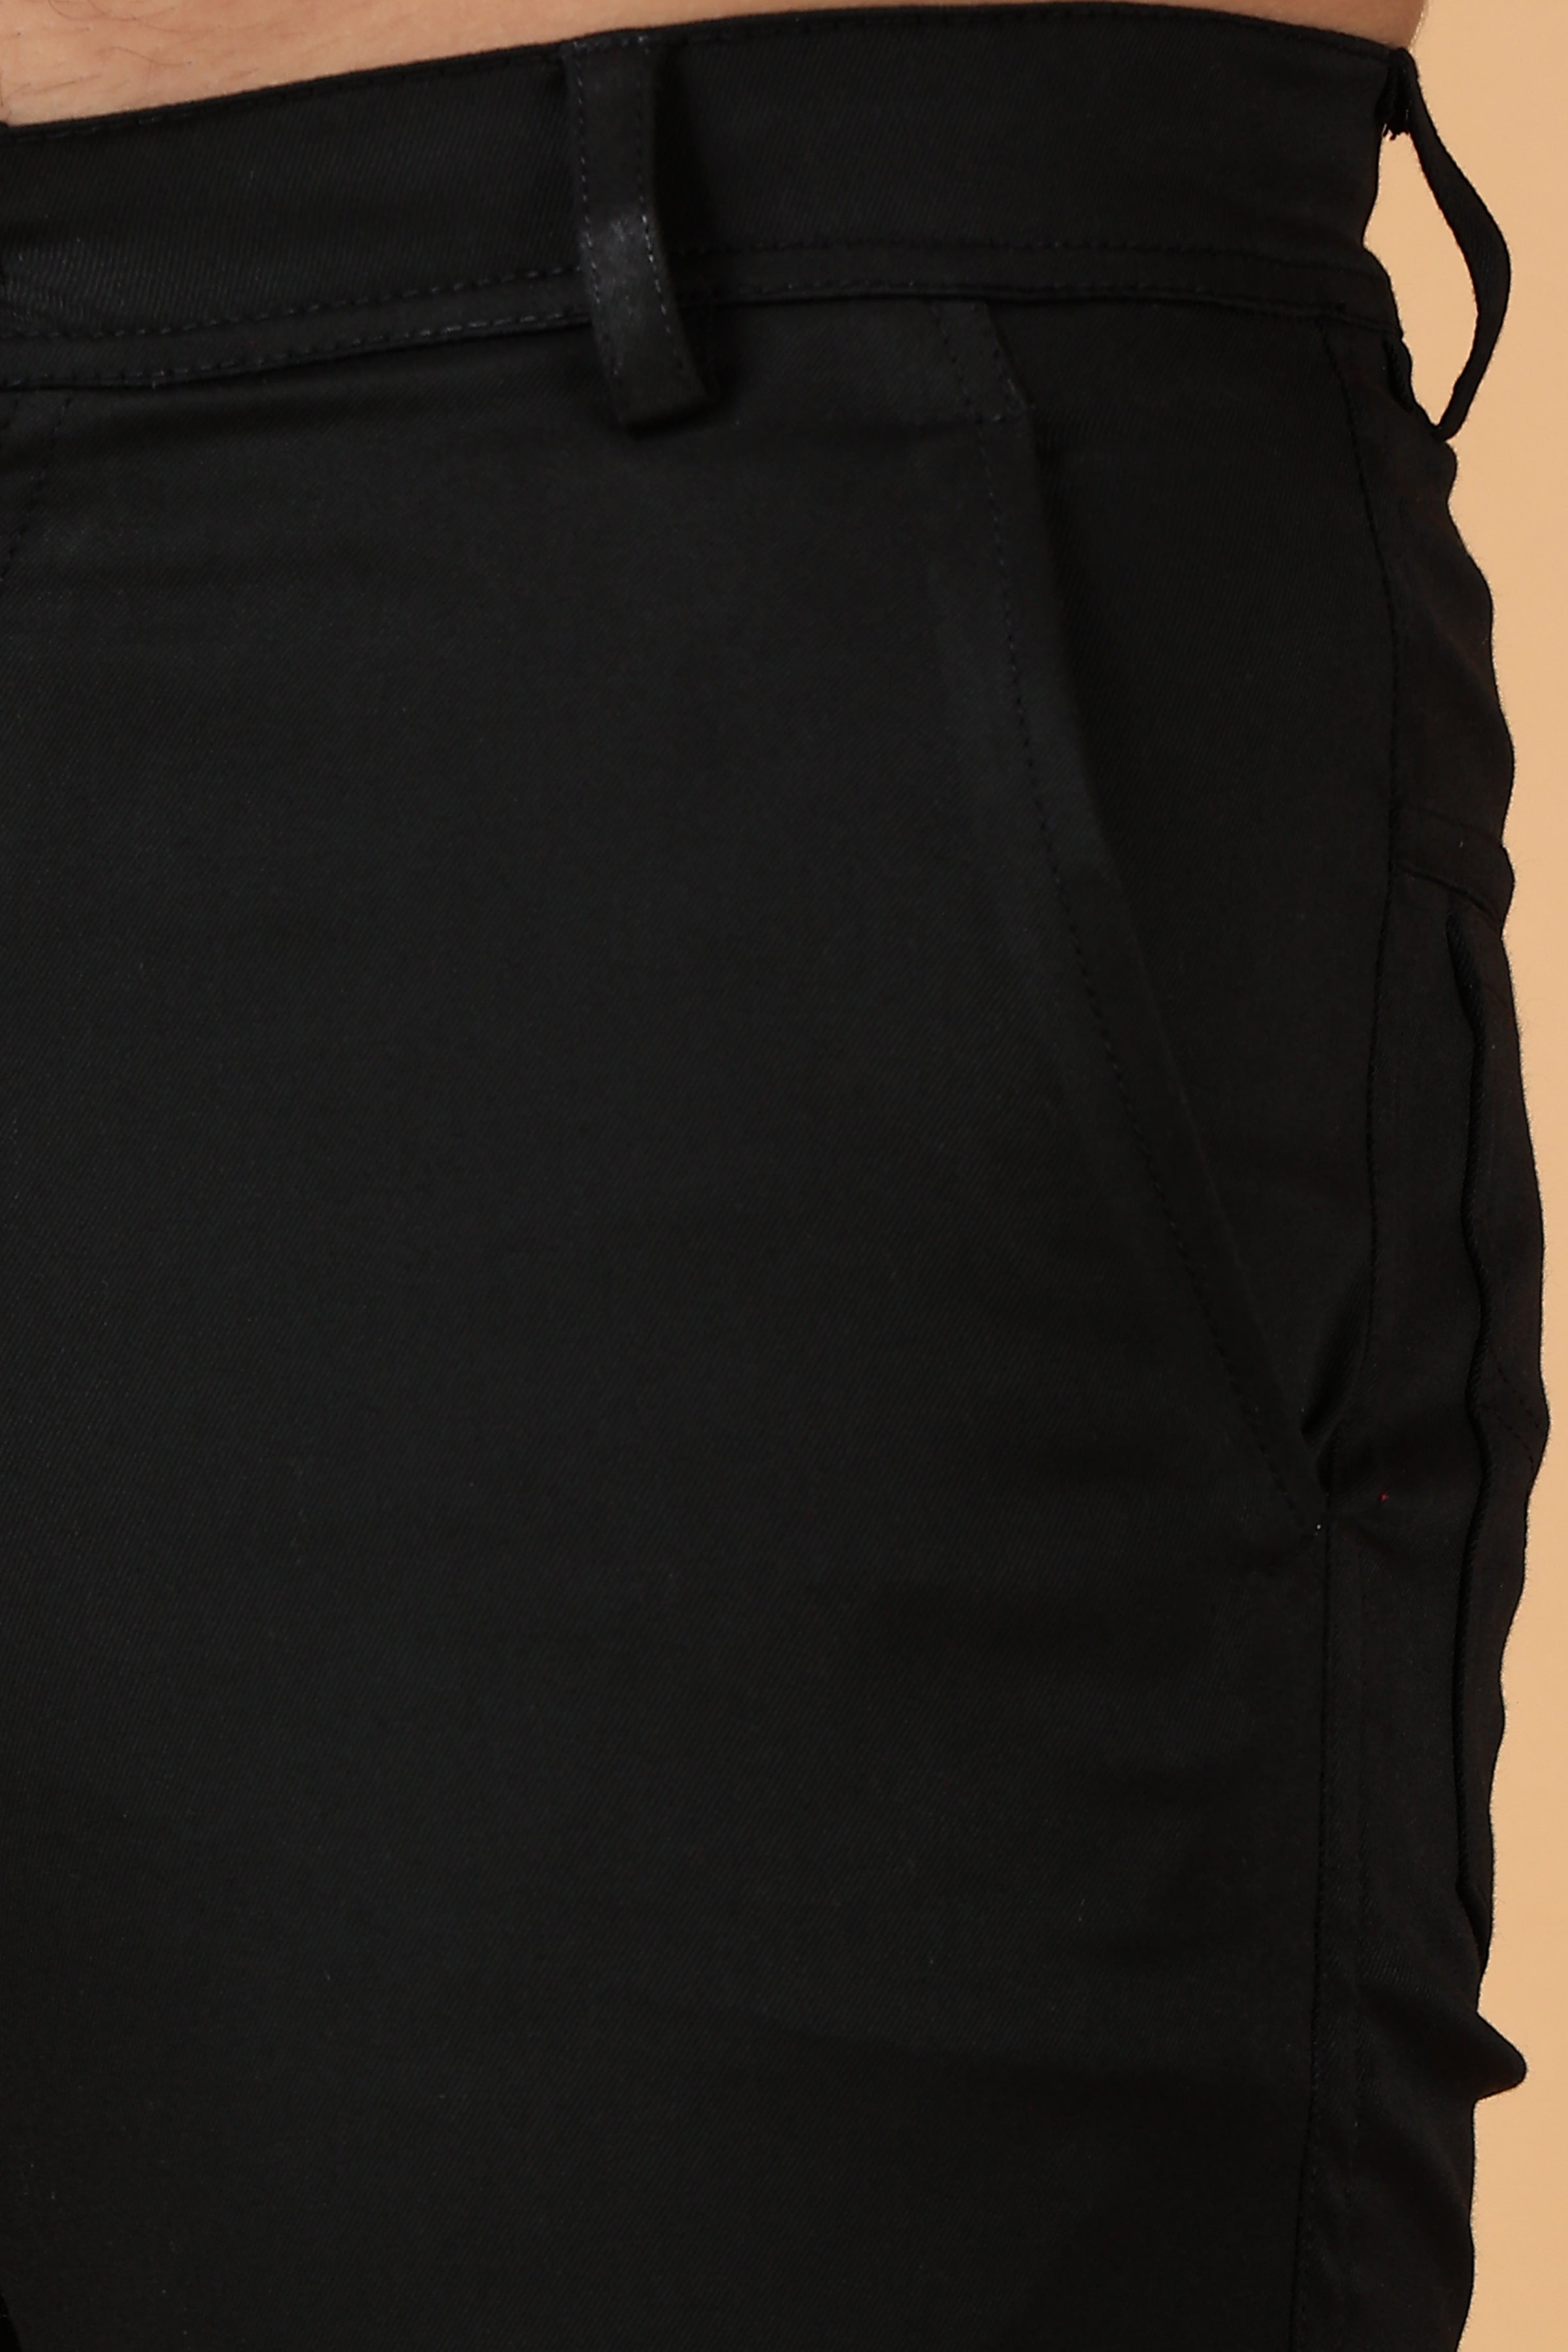 Buy Black Solid Cotton Stretch Chino Pant for Men Online India  tbase